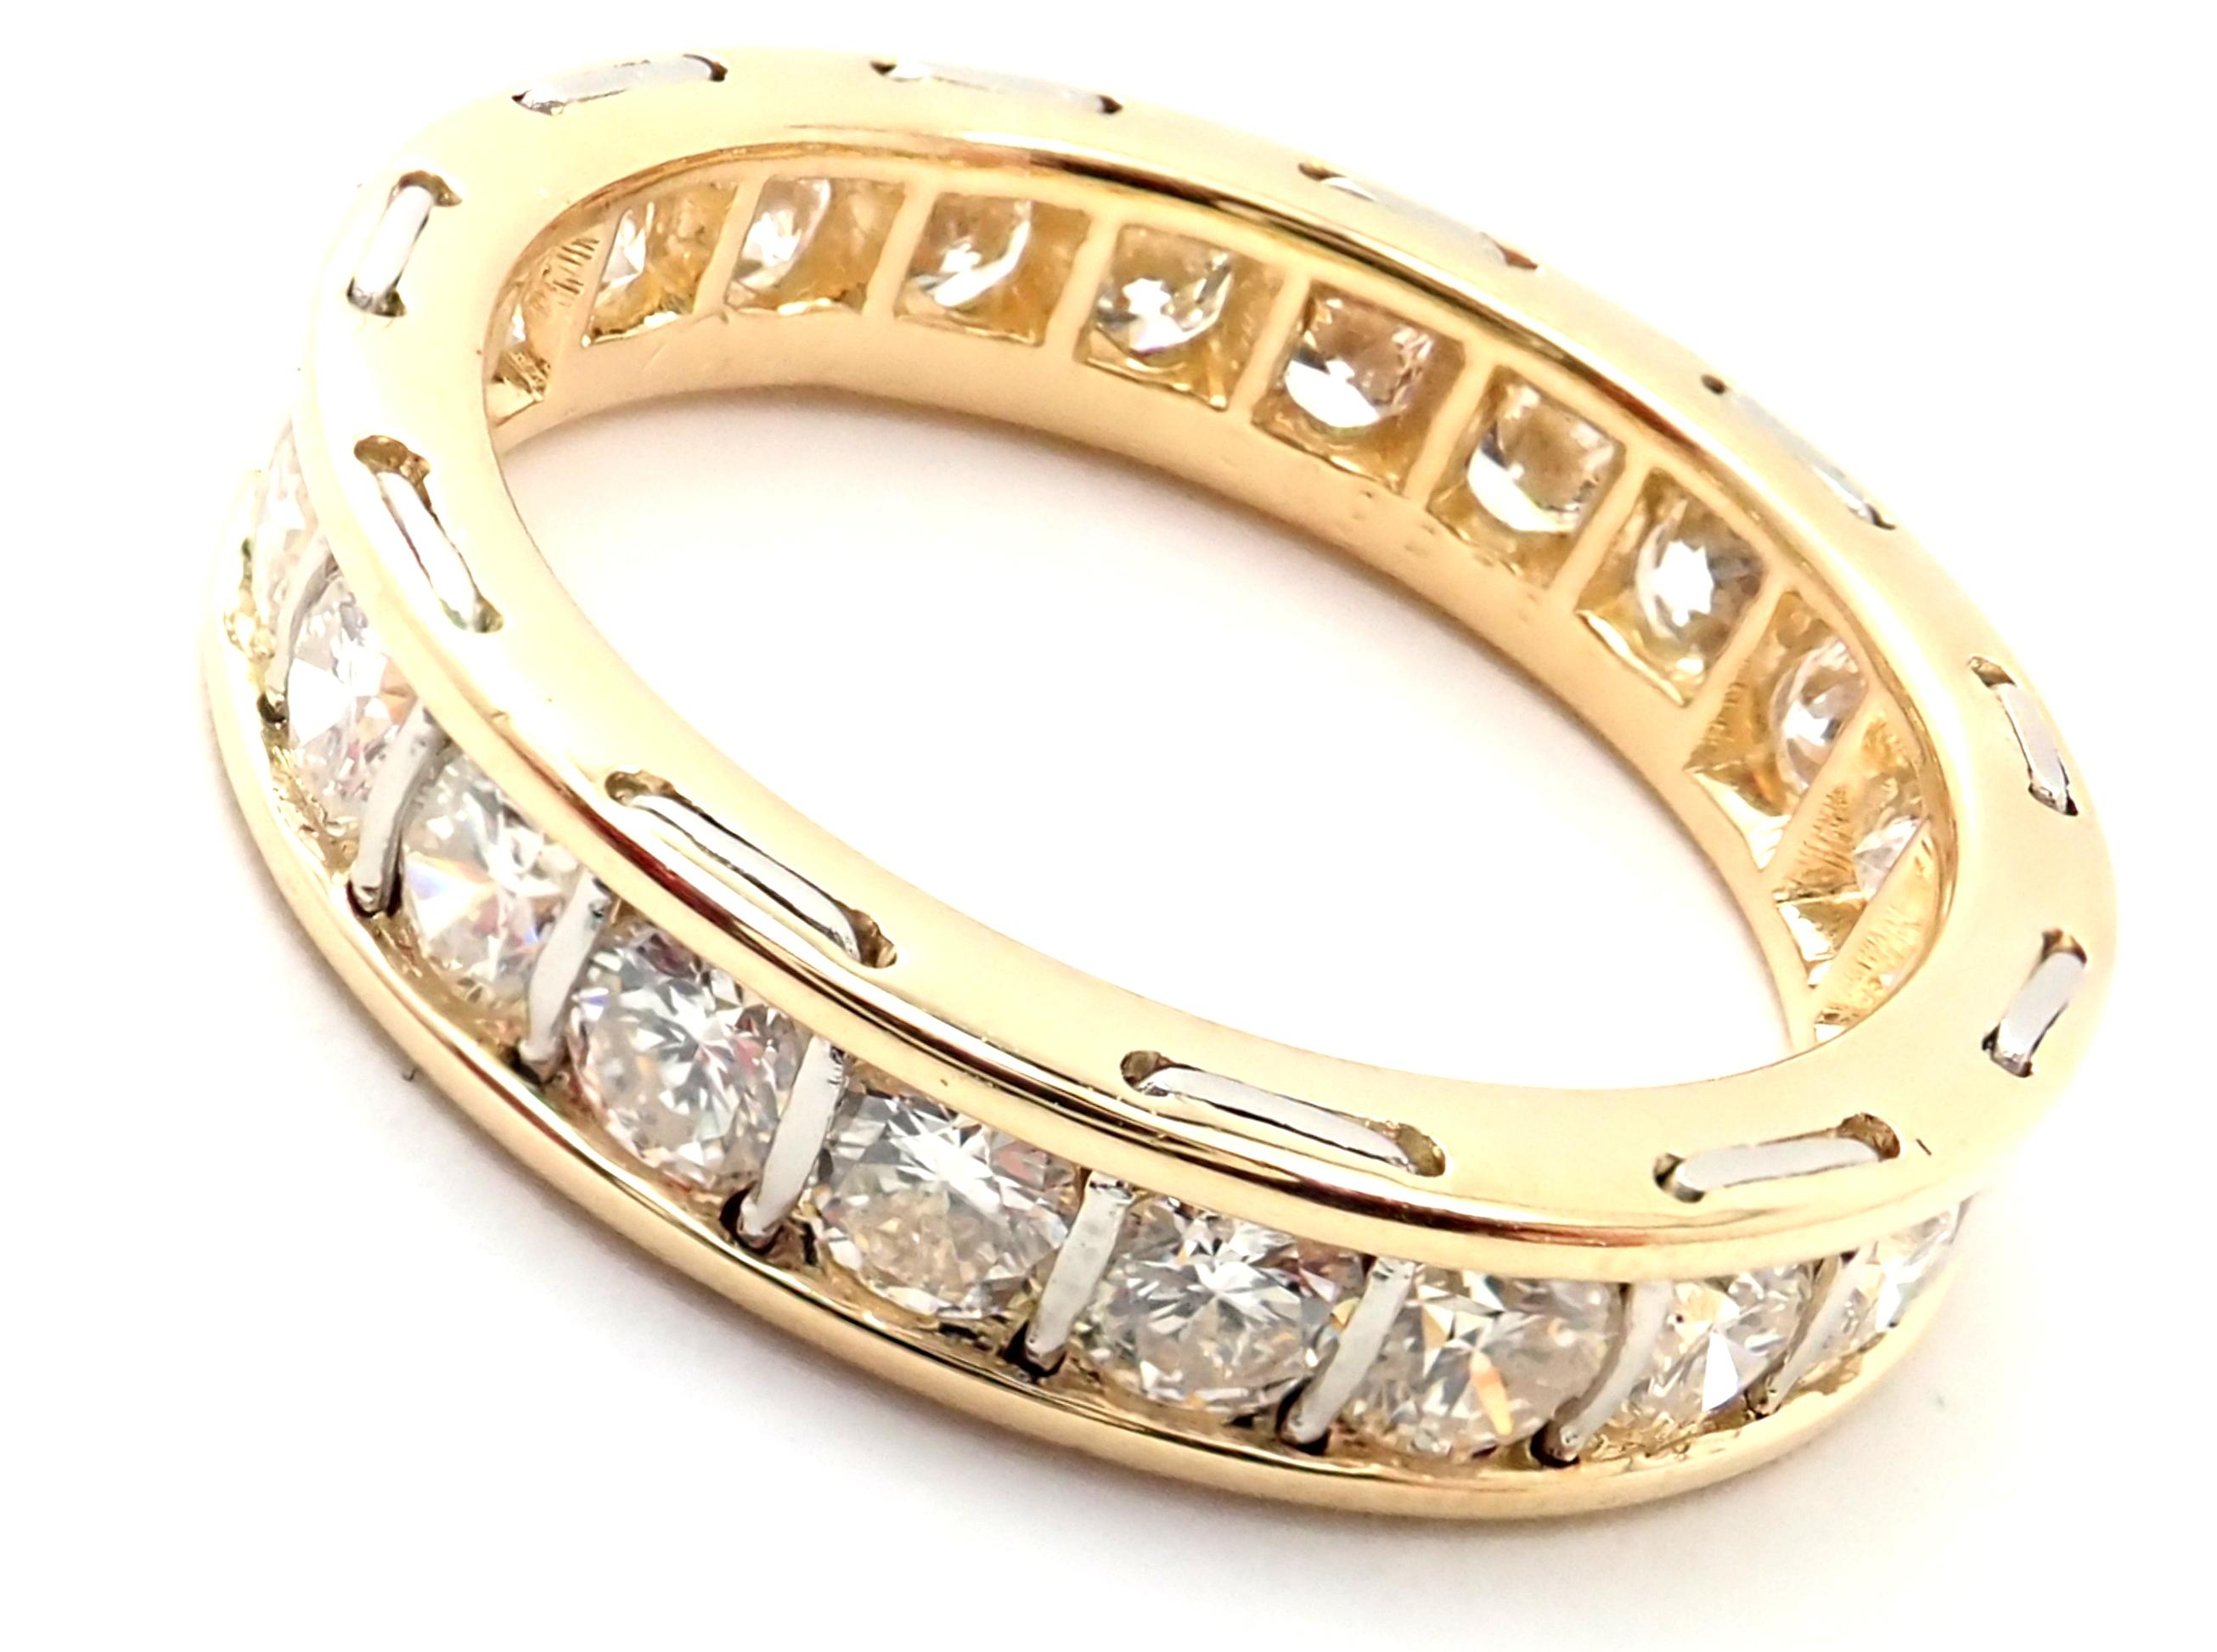 18k Yellow Gold Diamond Eternity Band Ring by Cartier.
With 22 round brilliant cut diamonds VVS1 clarity, E color total weight approx. 1.5ctw
Details:
Ring Size: 5.5
Weight: 4.1 grams 
Width: 4mm
Stamped Hallmarks:  Cartier 750 949978
*Free Shipping